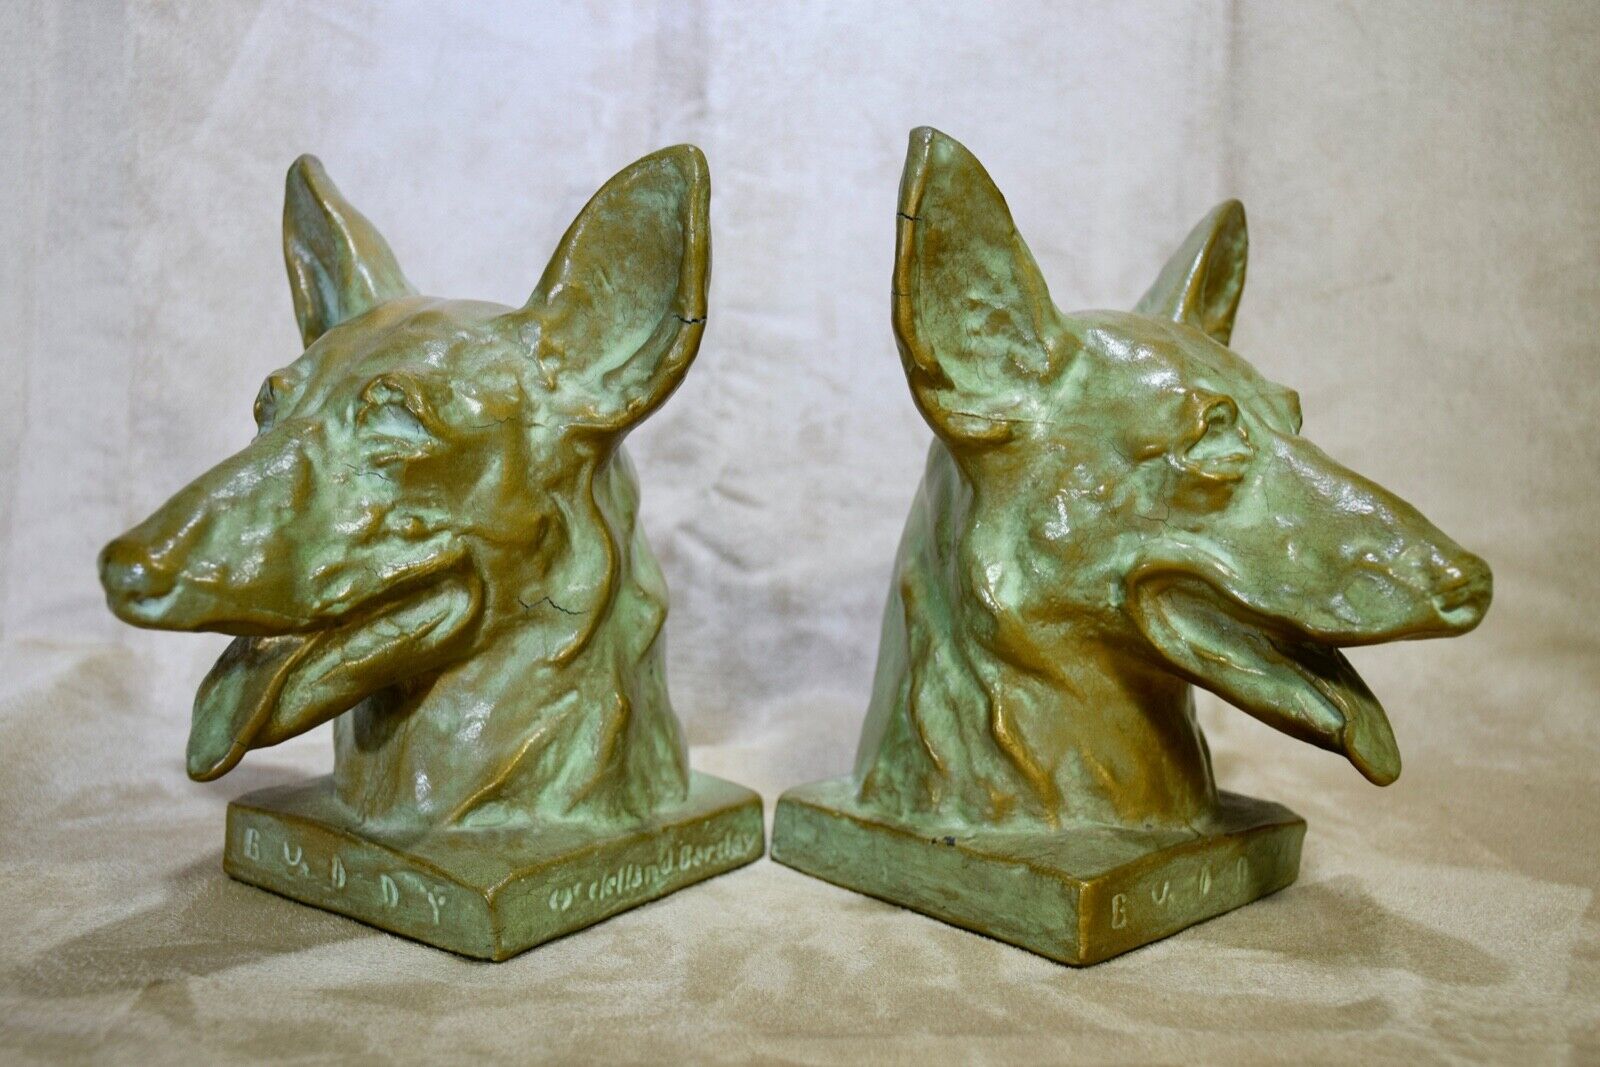 VINTAGE McCLELLAND BARCLAY SEEING EYE DOG FOR THE BLIND BOOKENDS - THE REAL DEAL